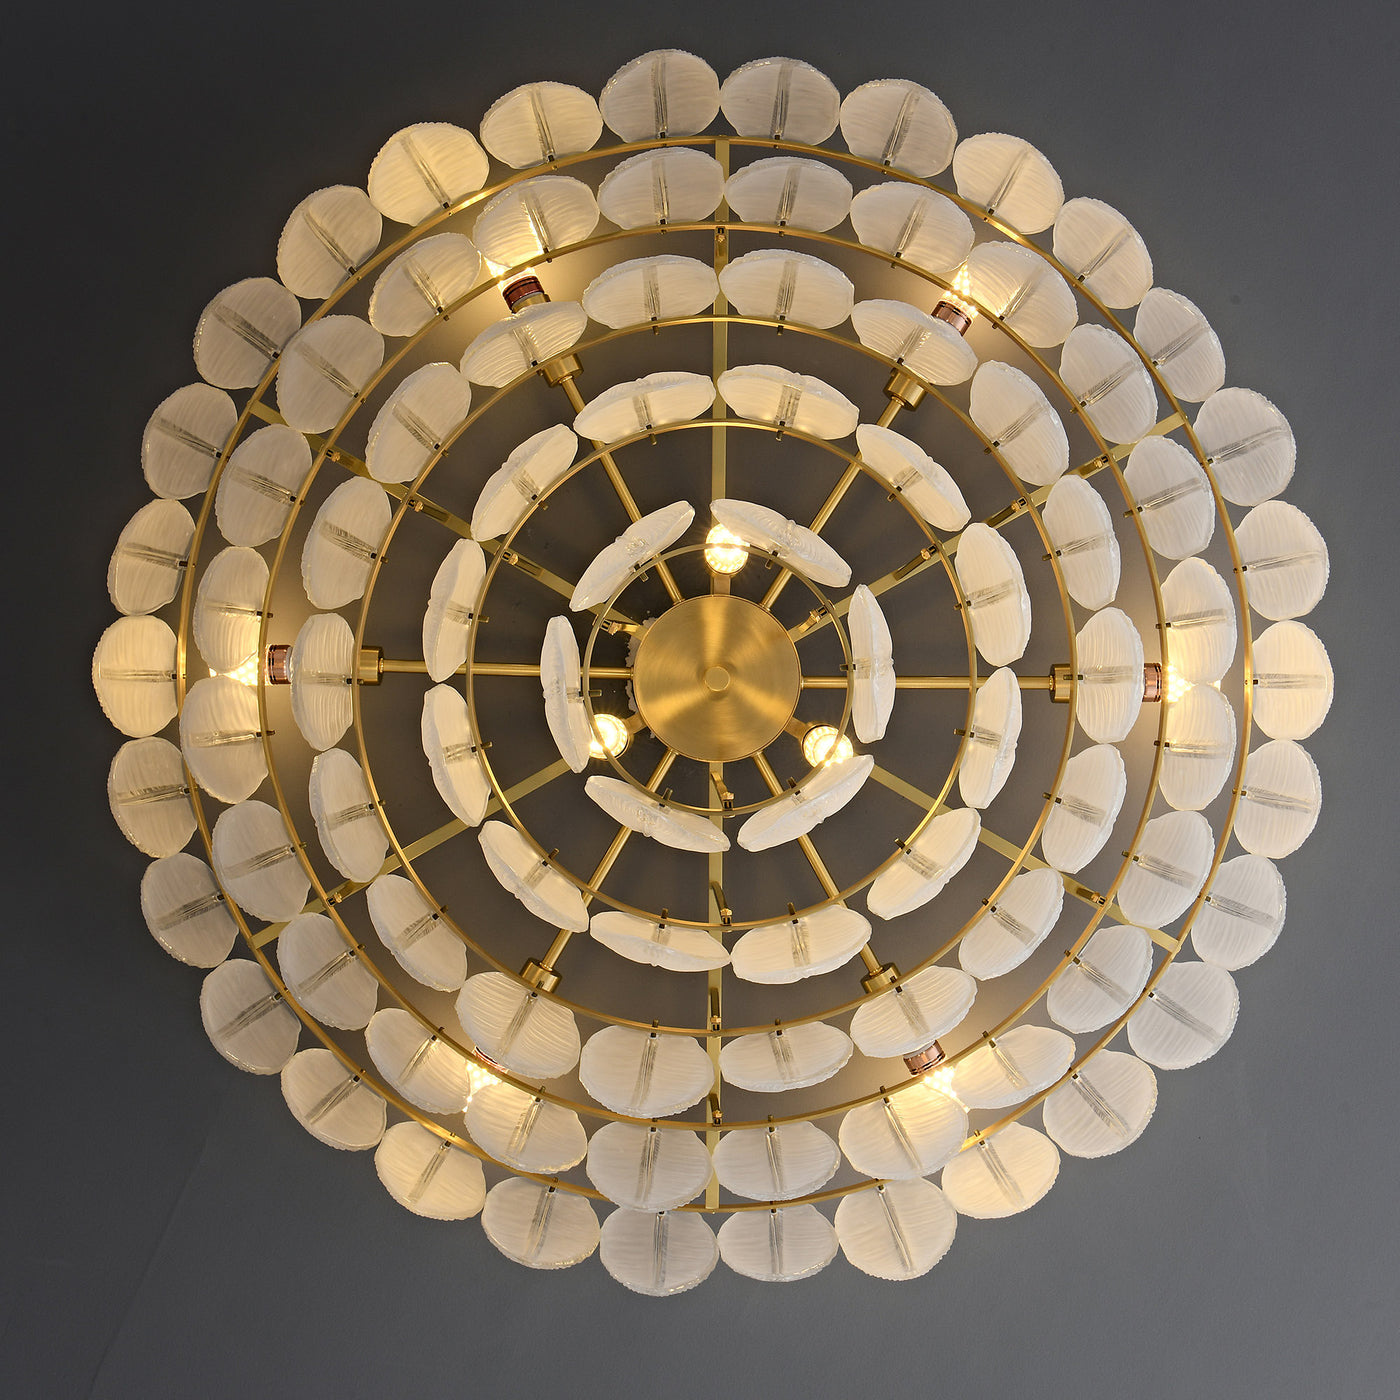 White Feather ceiling lamp